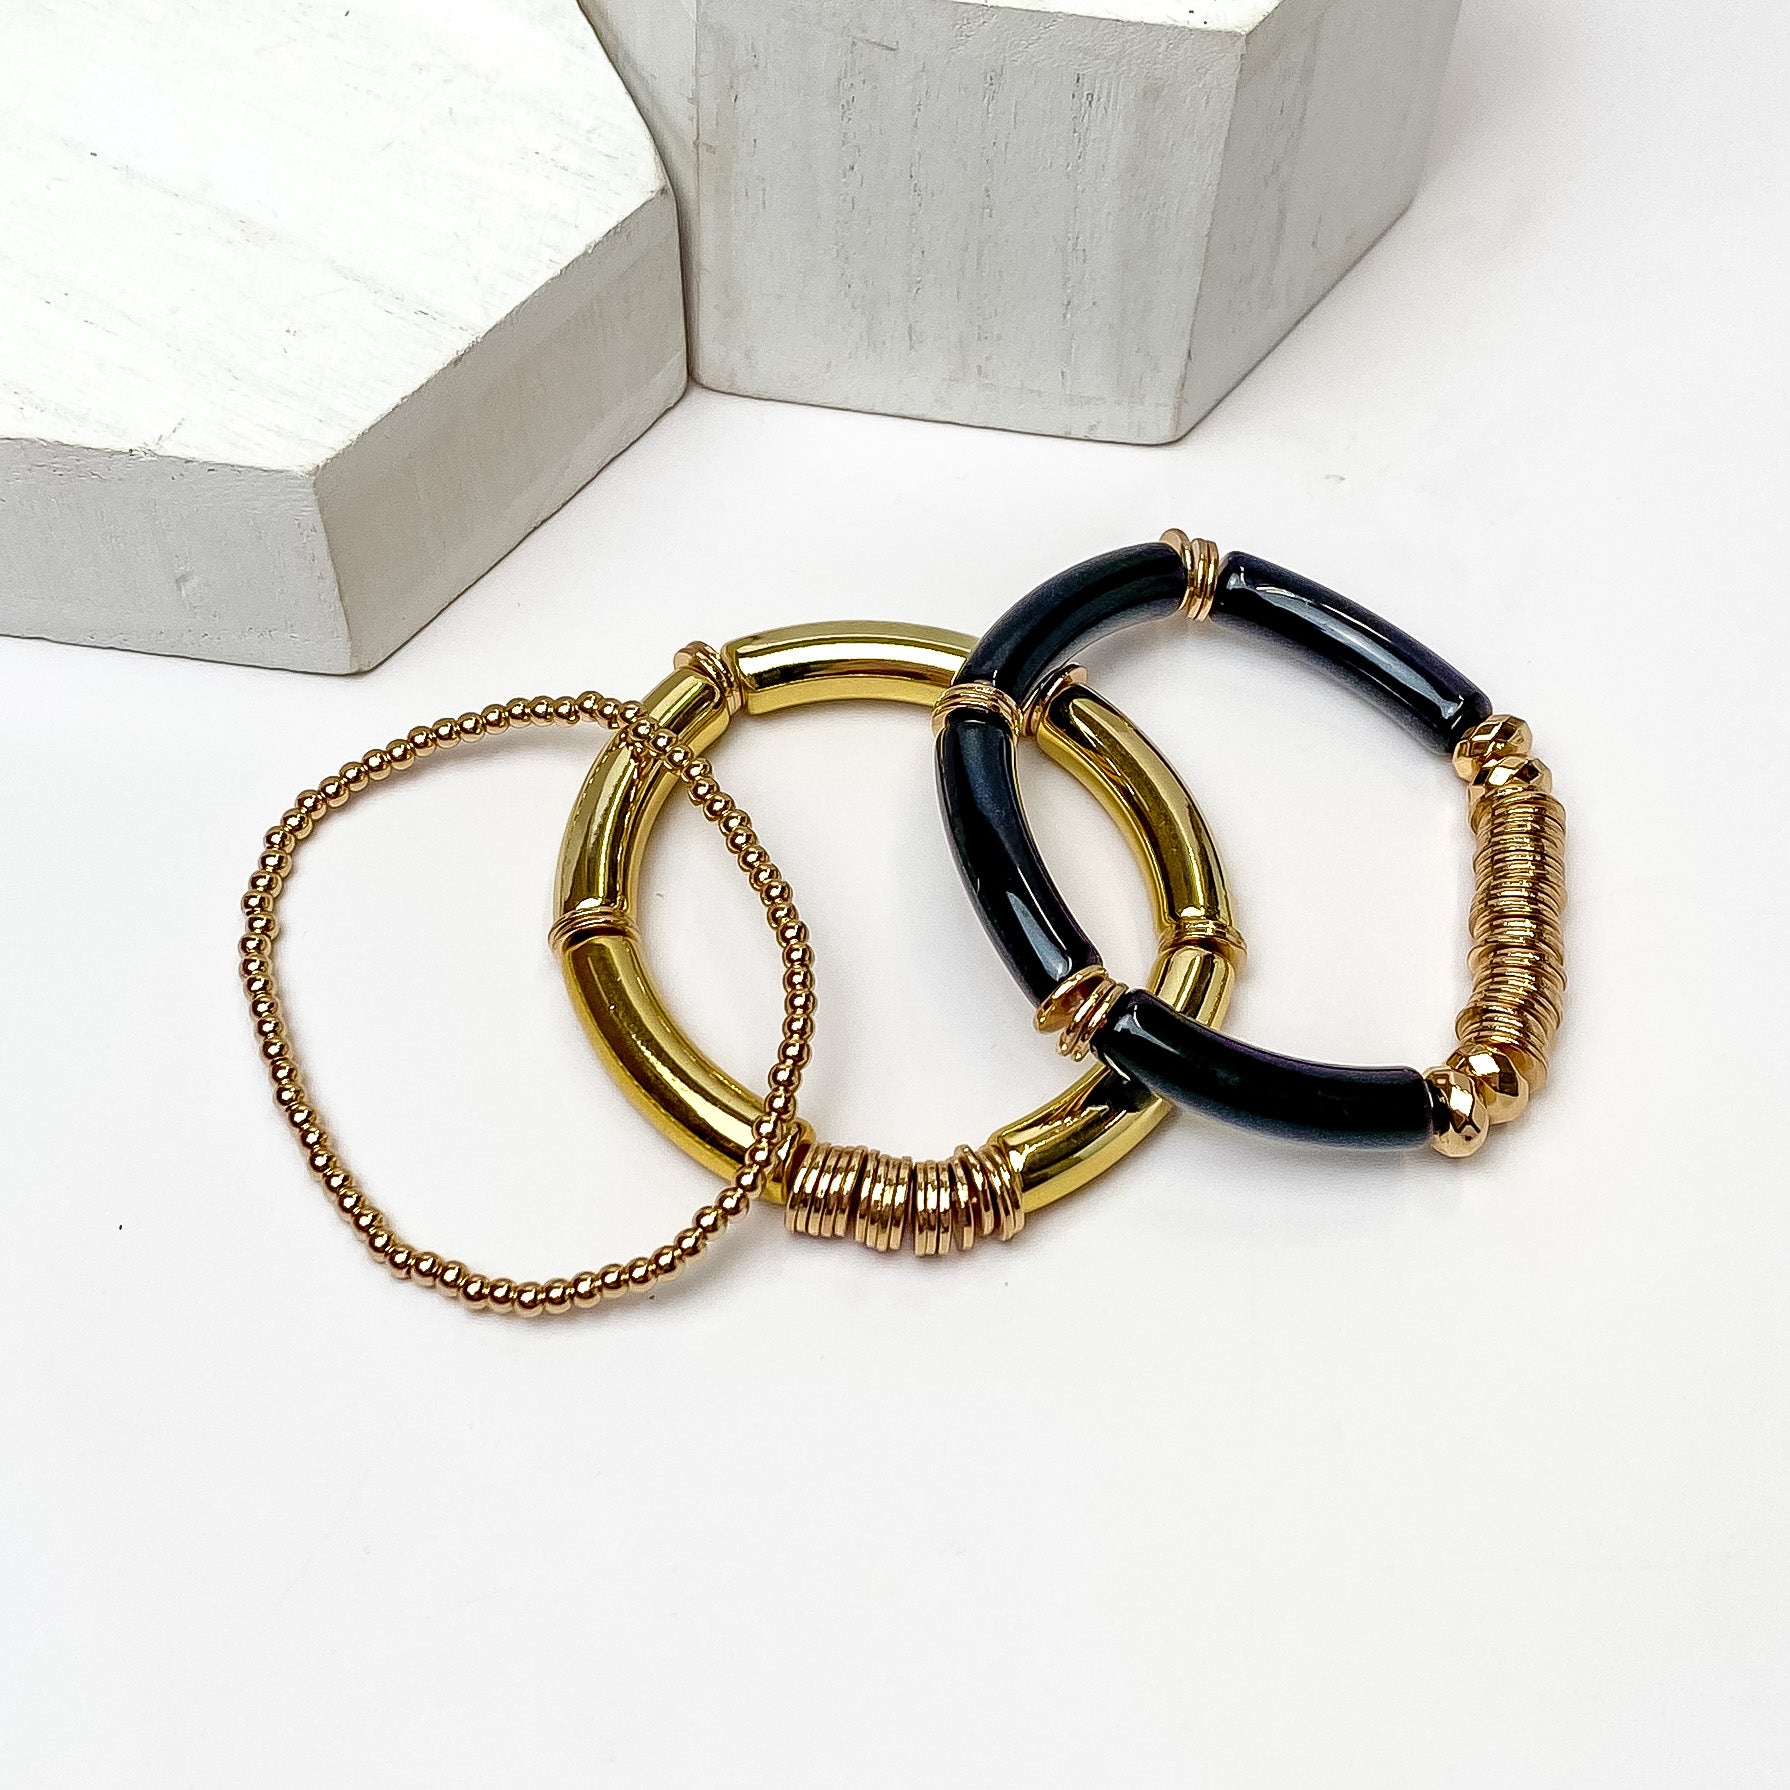 Set of Three | Bahama Nights Gold Tone Stretchy Bracelets With Accents of Black. Pictured on a white background with white objects above the bracelets. 